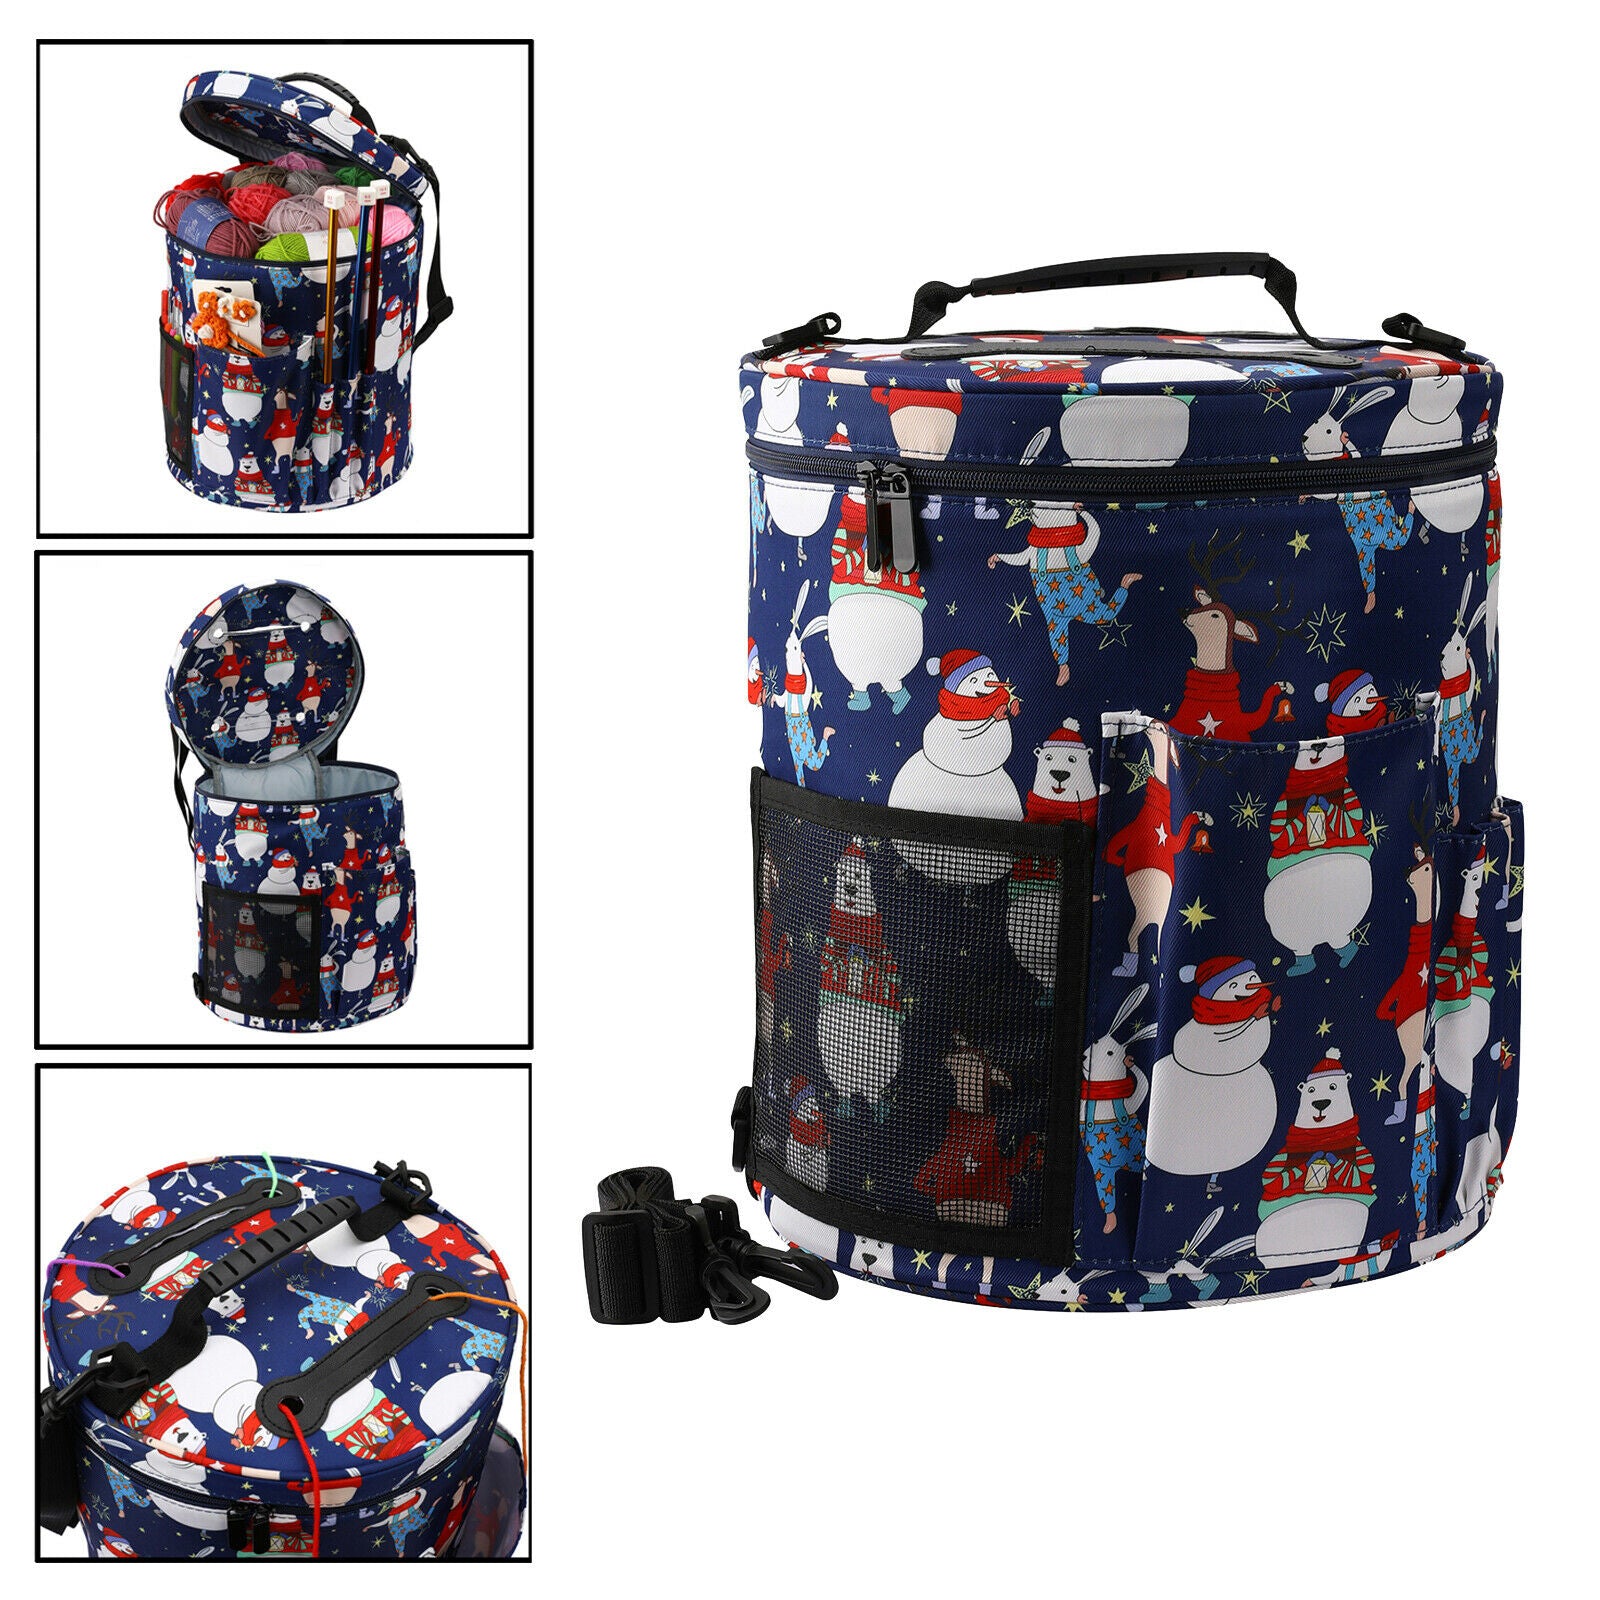 Durable Knitting Bag Sewing Craft Yarn Storage for Sewing Tools Crochet Hook